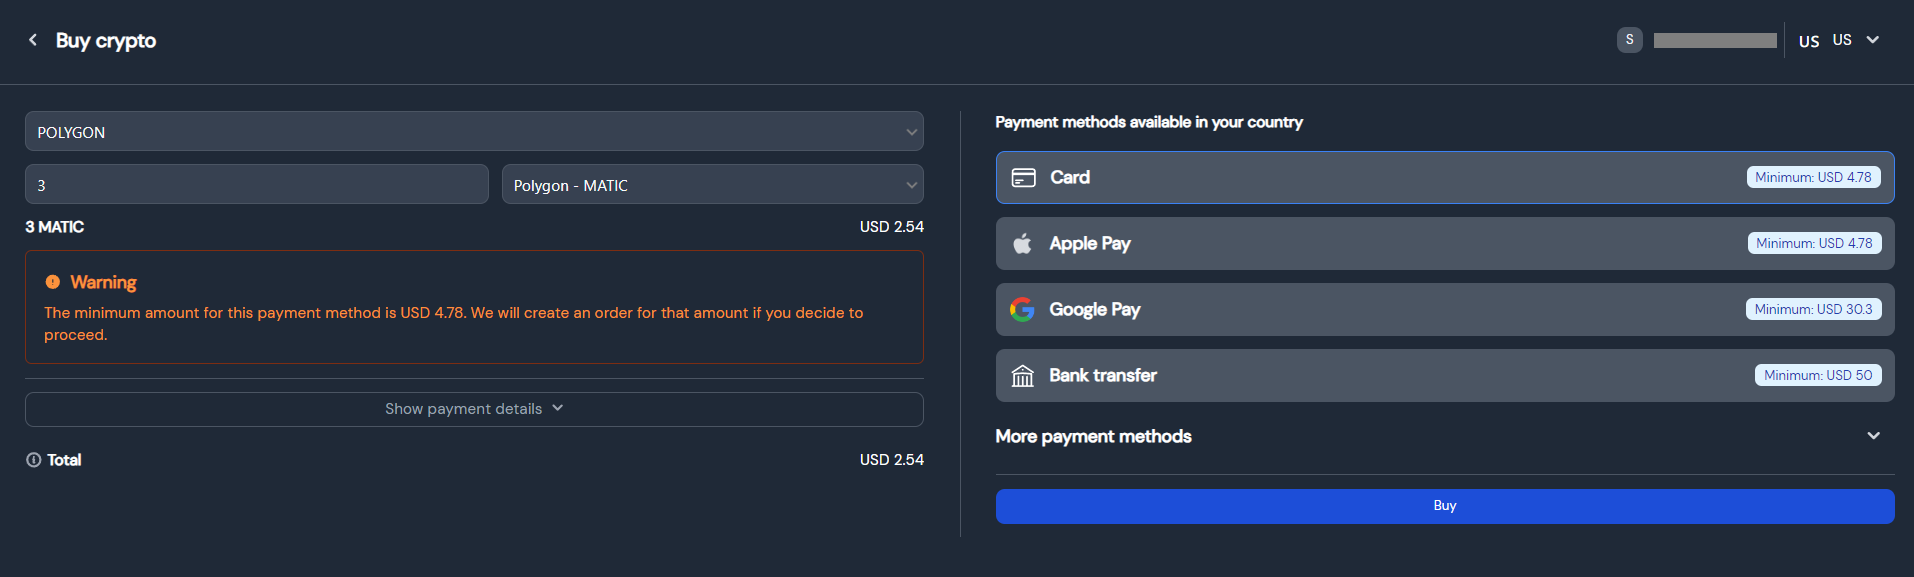 In order to proceed, SphereOne will create an order for the minimum amount for that specific payment.